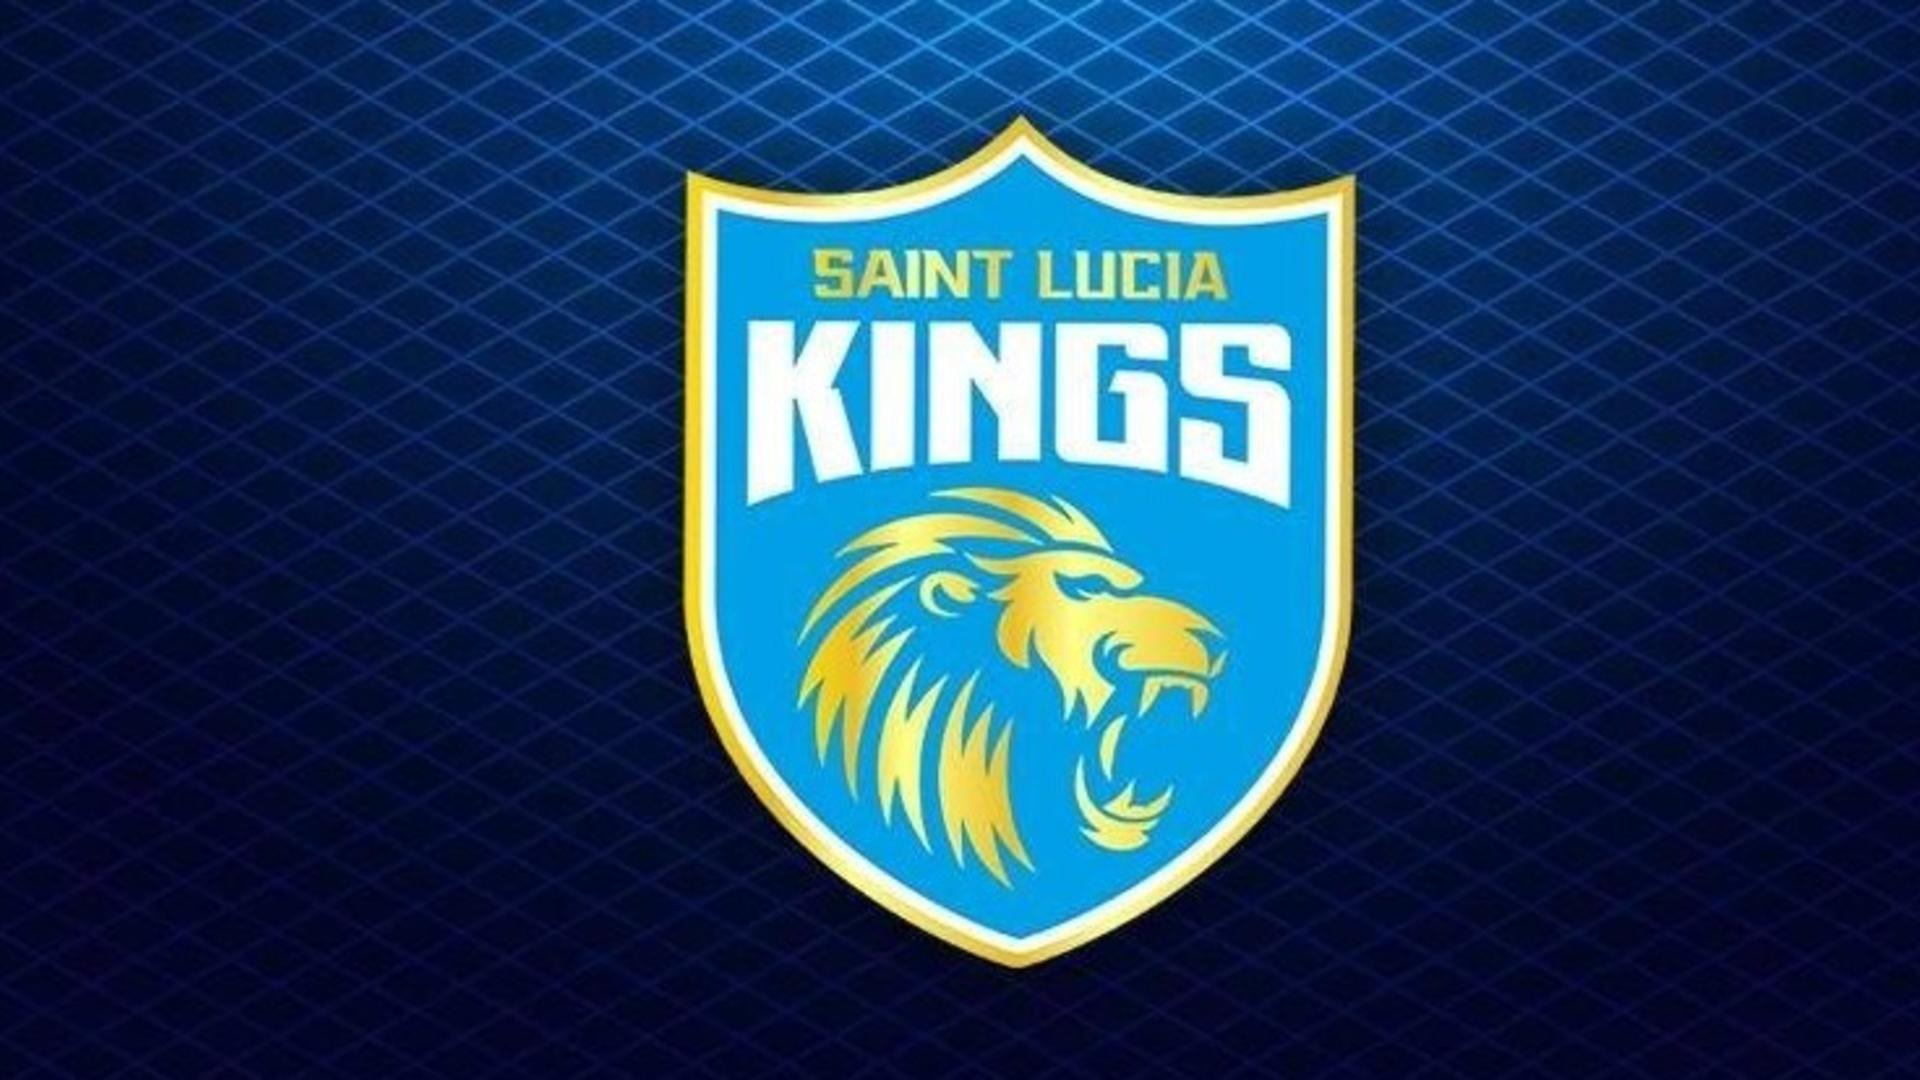 Saint Lucia Kings kick-off CPL 2021 with a tryst against the Tallawahs